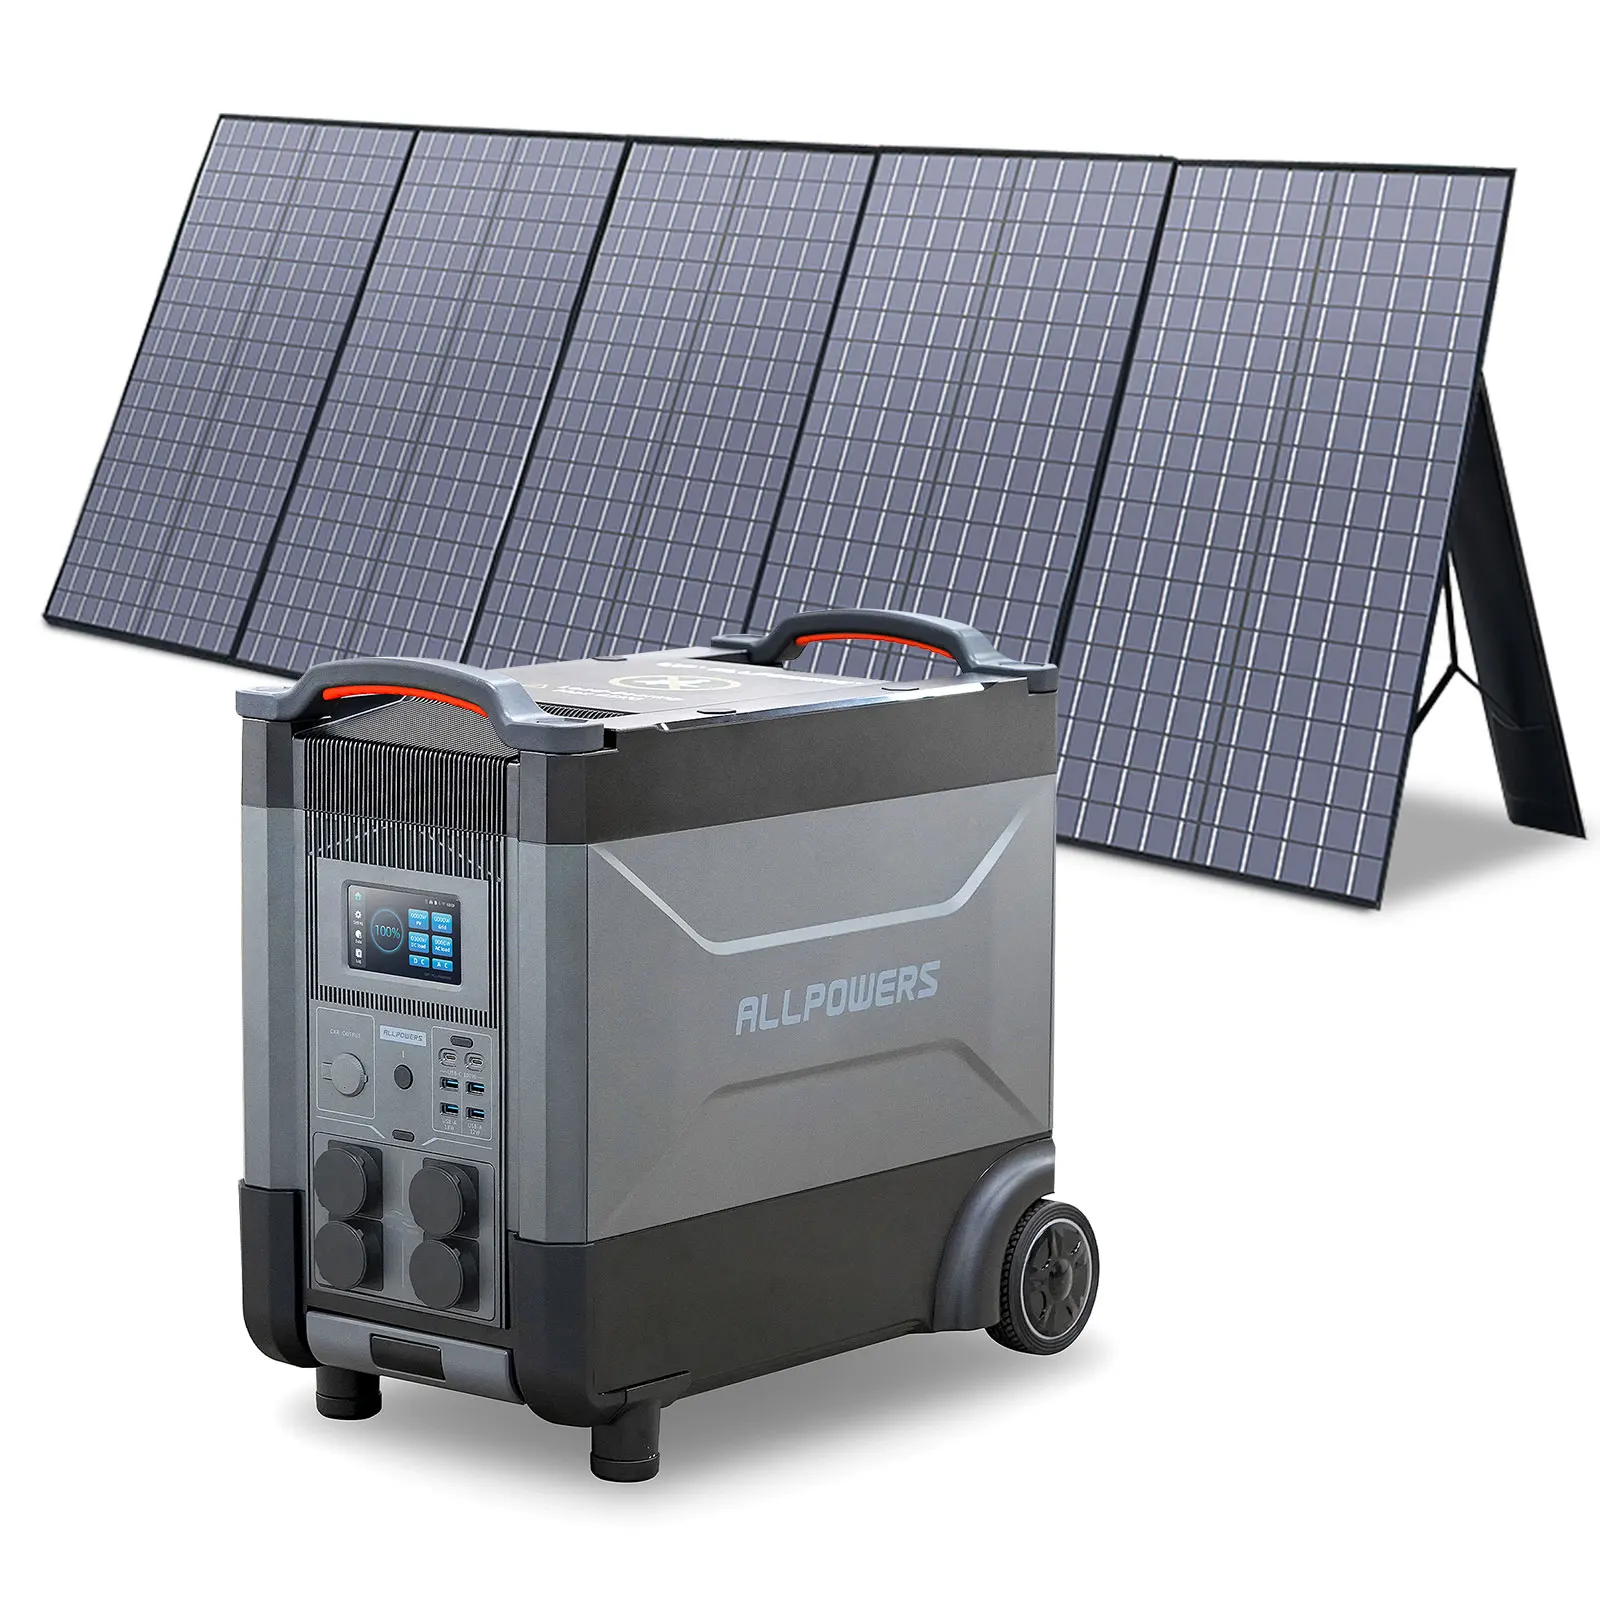 

ALLPOWERS Solar Generator R4000 with 400W Solar Panel, 4 X 4000W (6000W Surge) AC Outlets, 3600Wh Portable Power Station